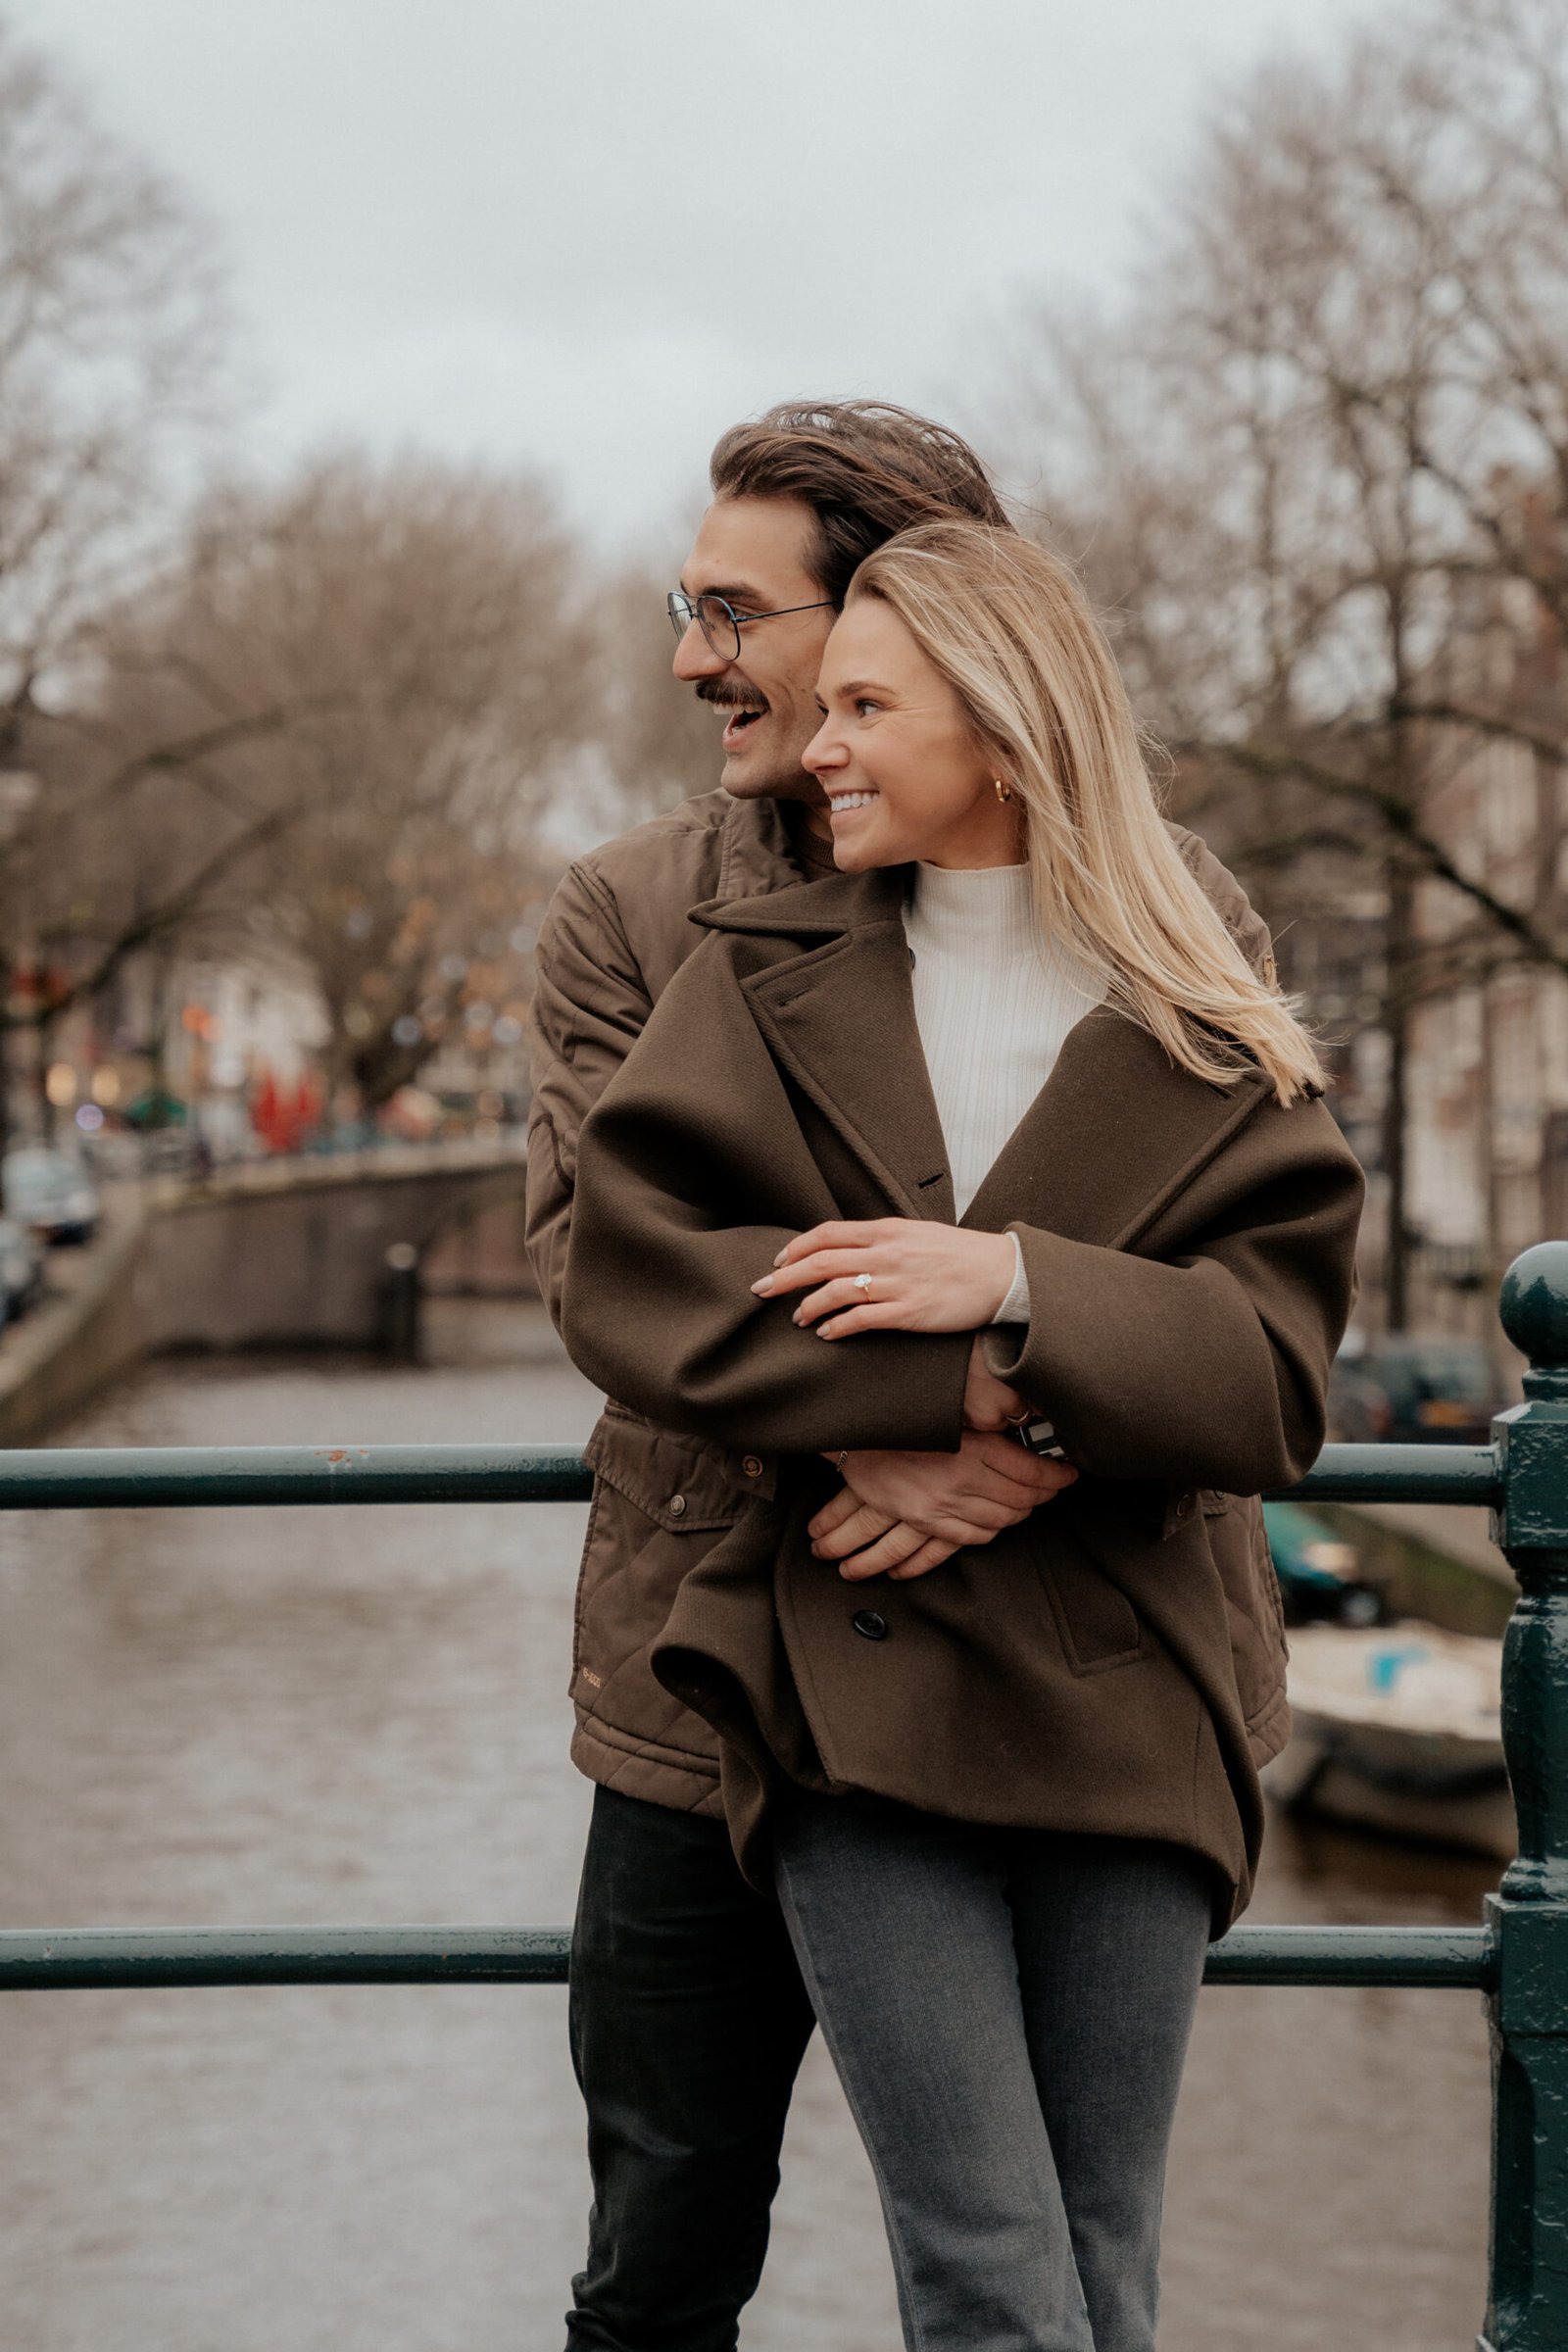 Proposal Photoshoot in Amsterdam